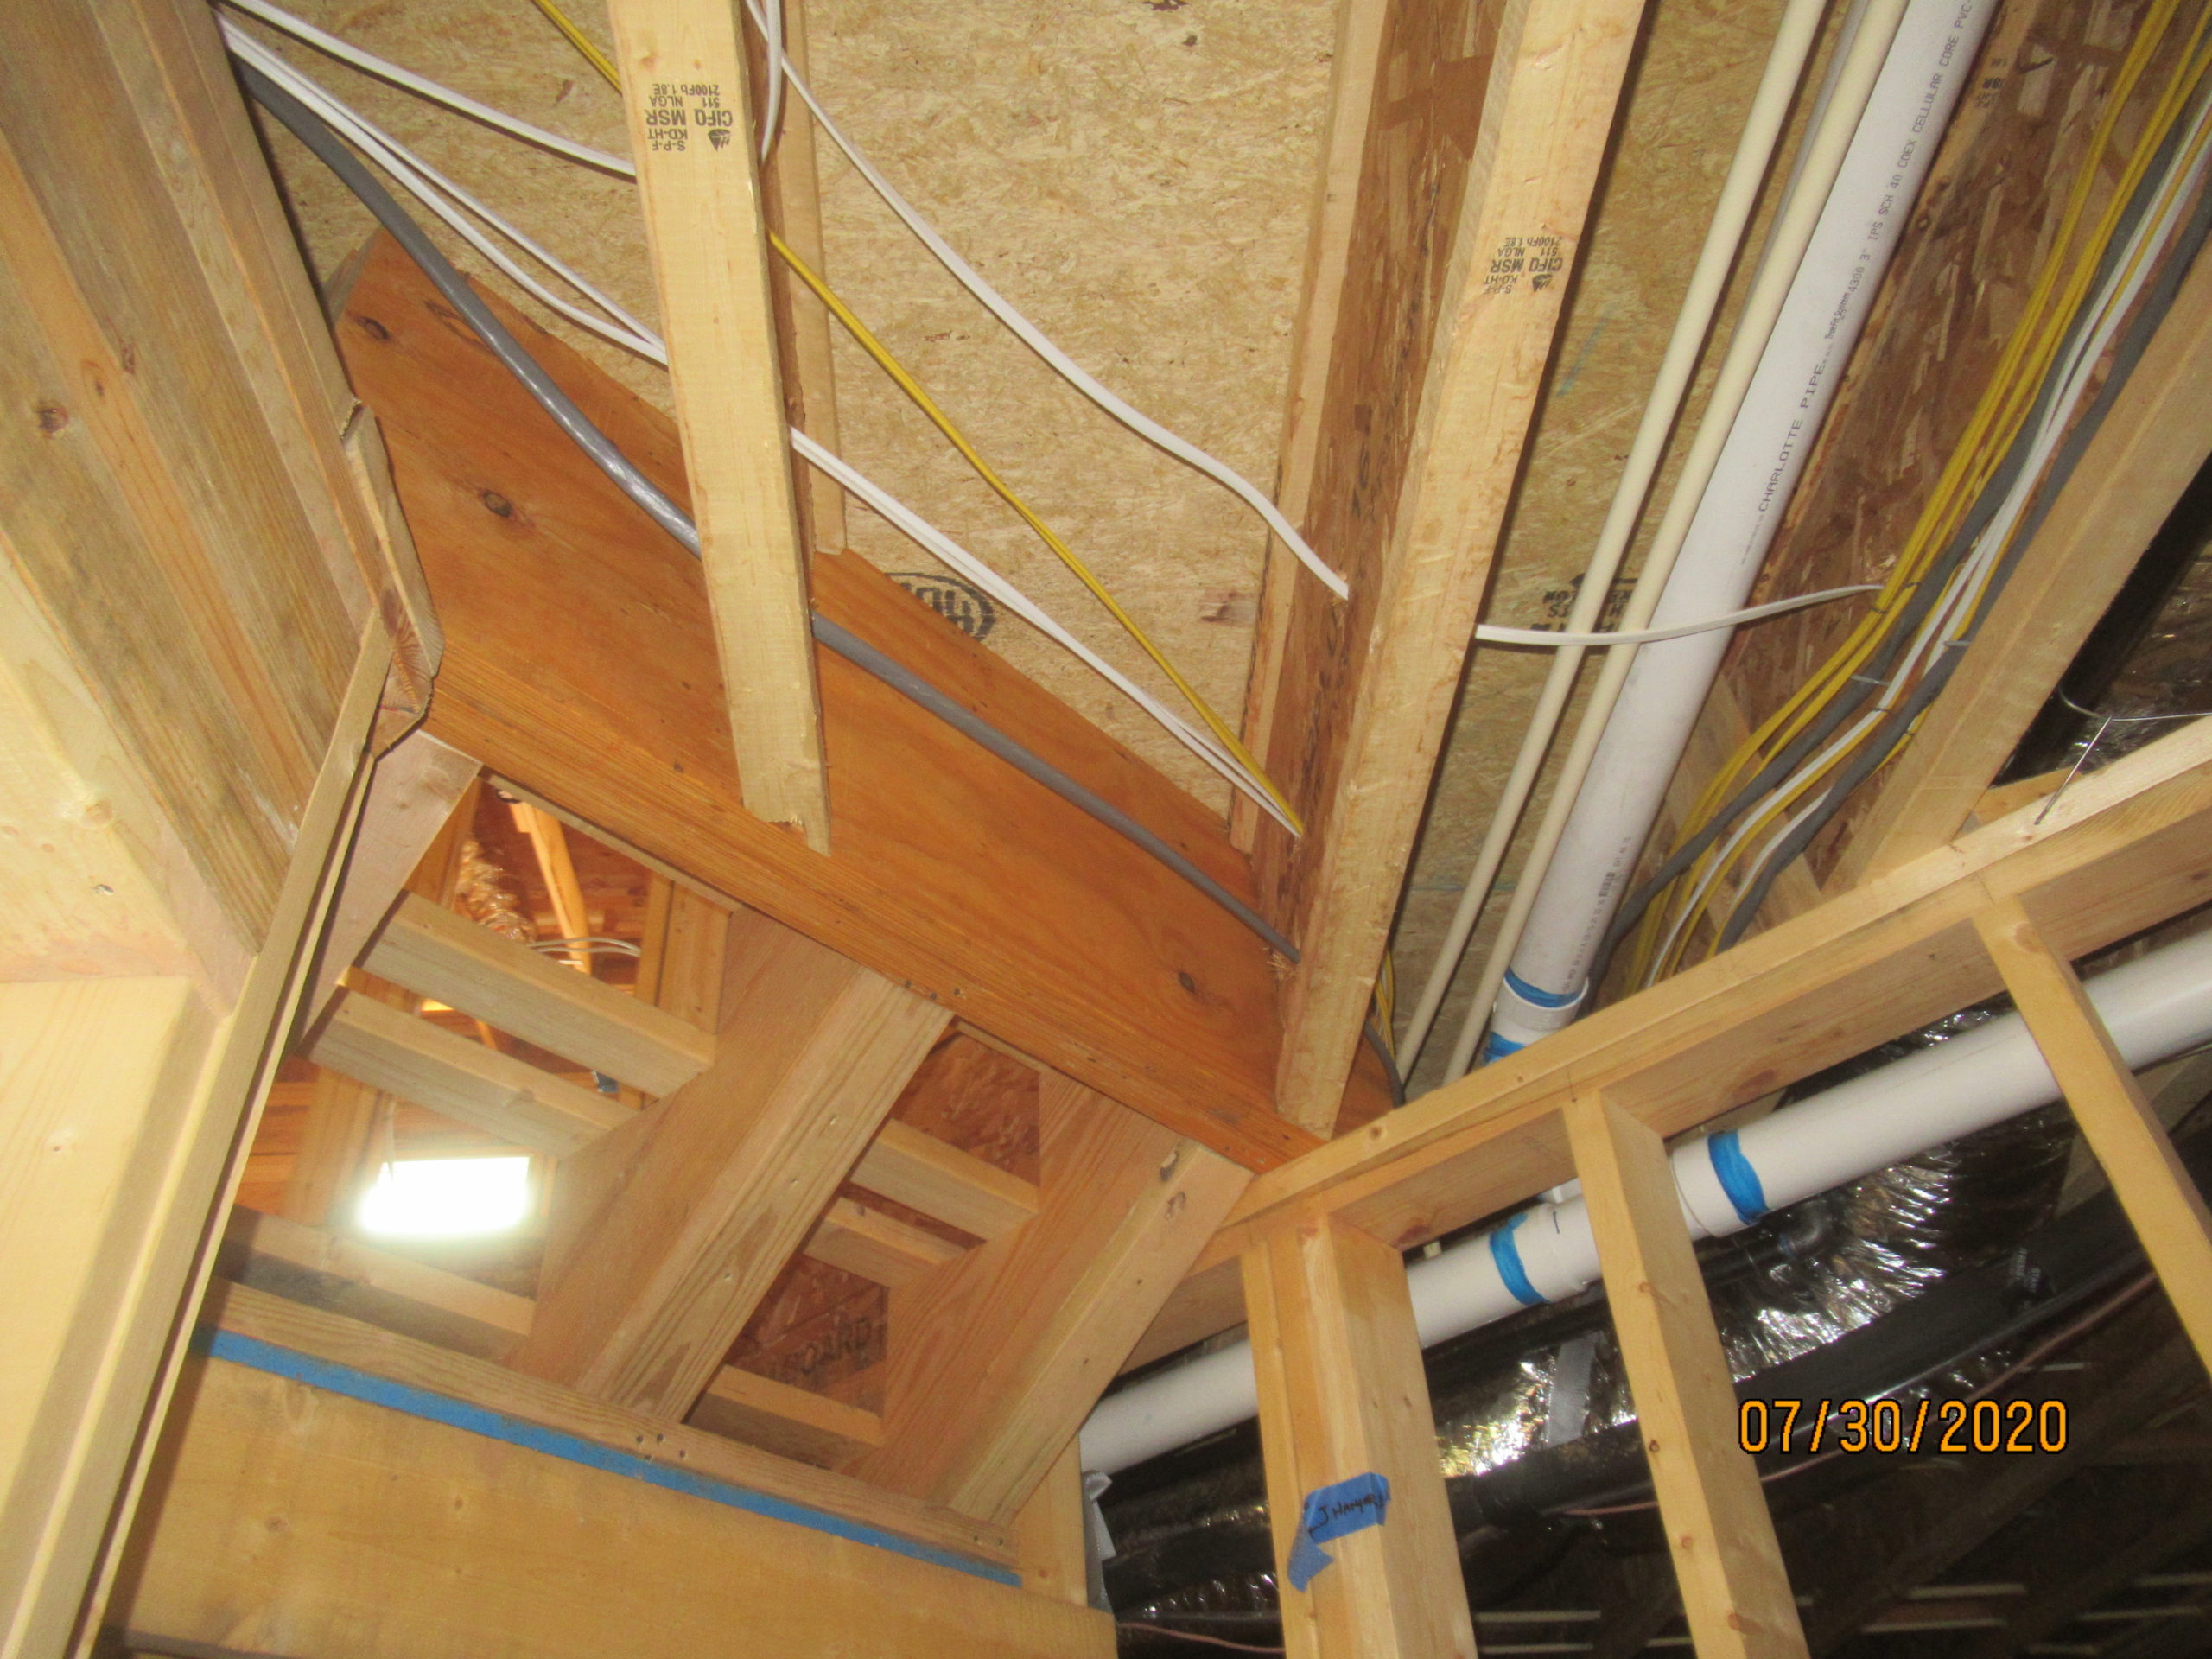 Unsupported I-joists in home inspection